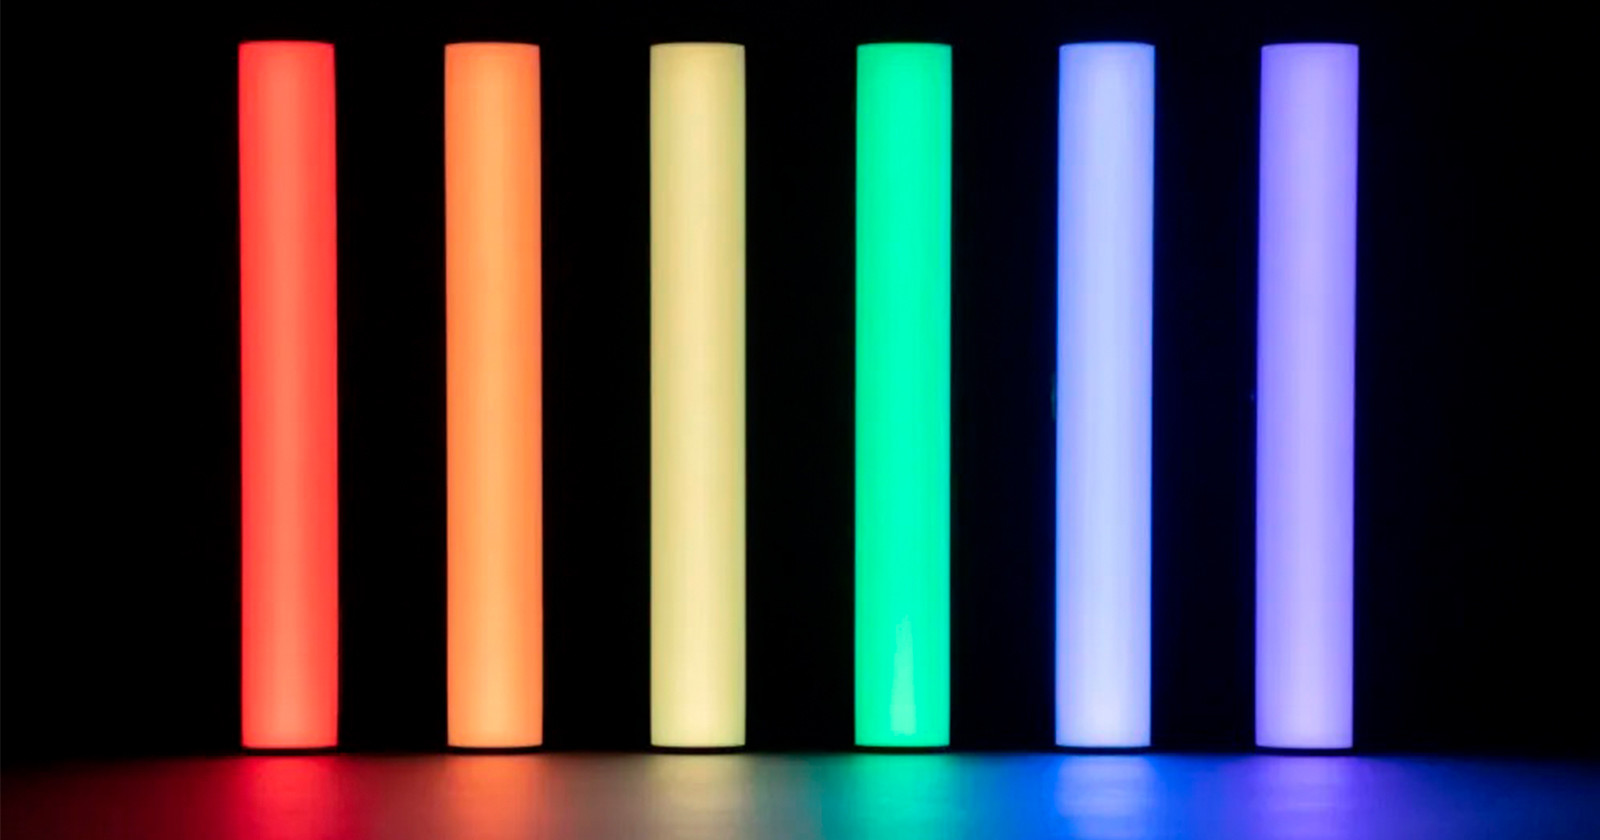 Aputures MT Pro Mini Tube Light is Packed with Ultra-Precise RGBW LEDs